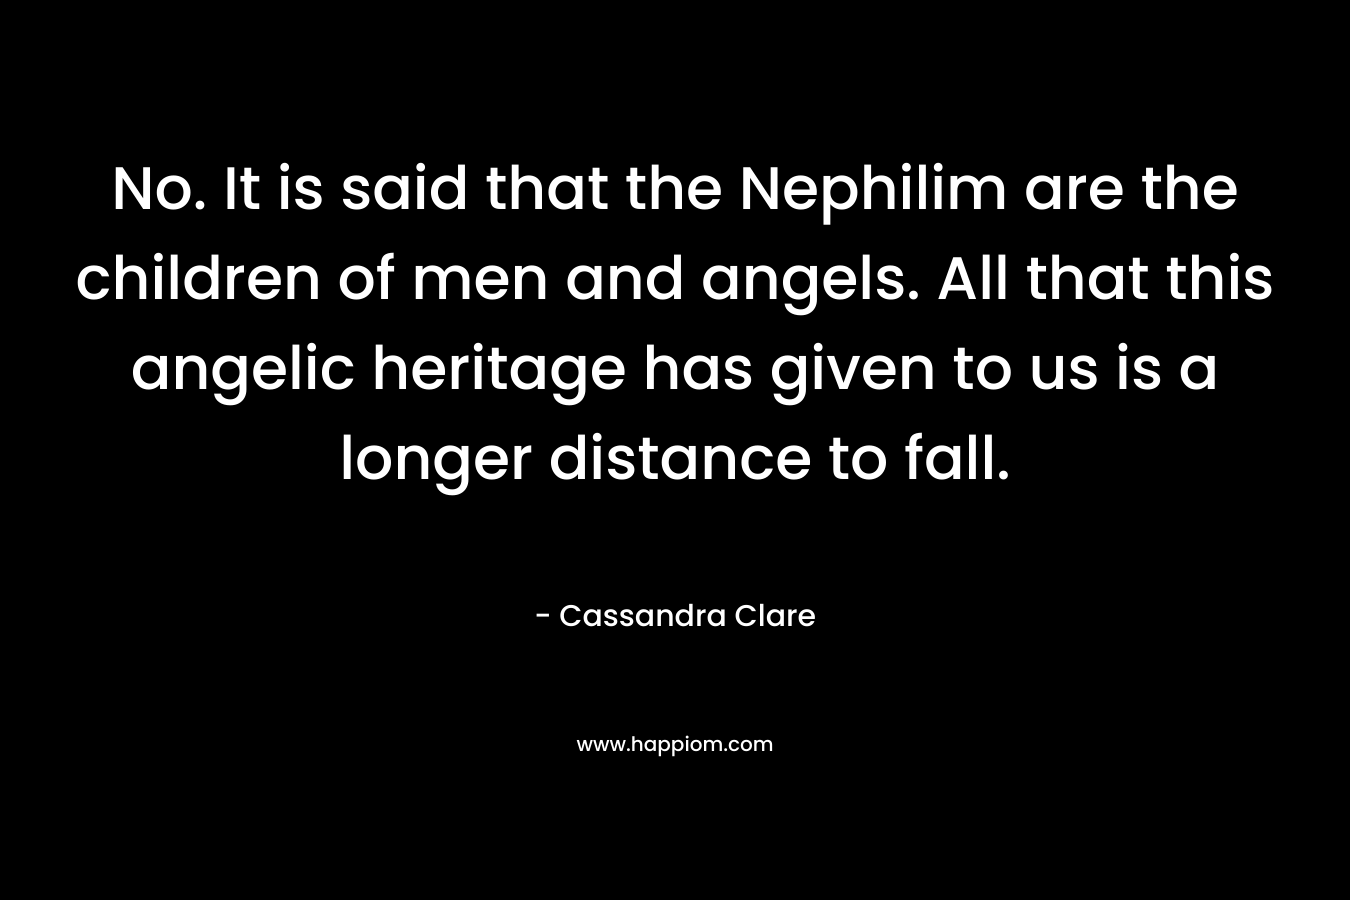 No. It is said that the Nephilim are the children of men and angels. All that this angelic heritage has given to us is a longer distance to fall.